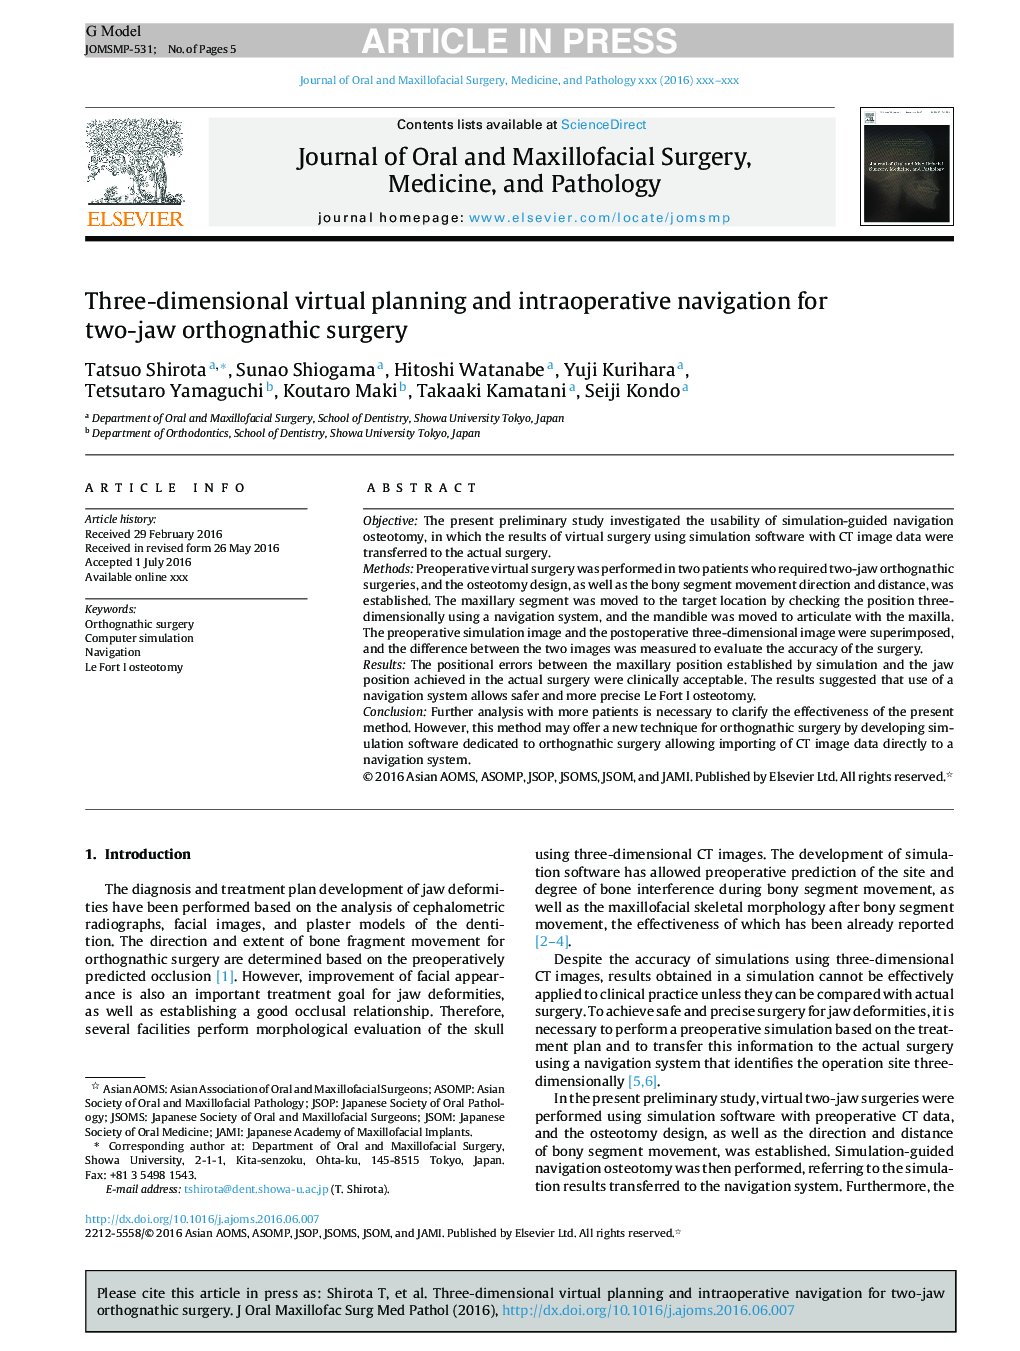 Three-dimensional virtual planning and intraoperative navigation for two-jaw orthognathic surgery